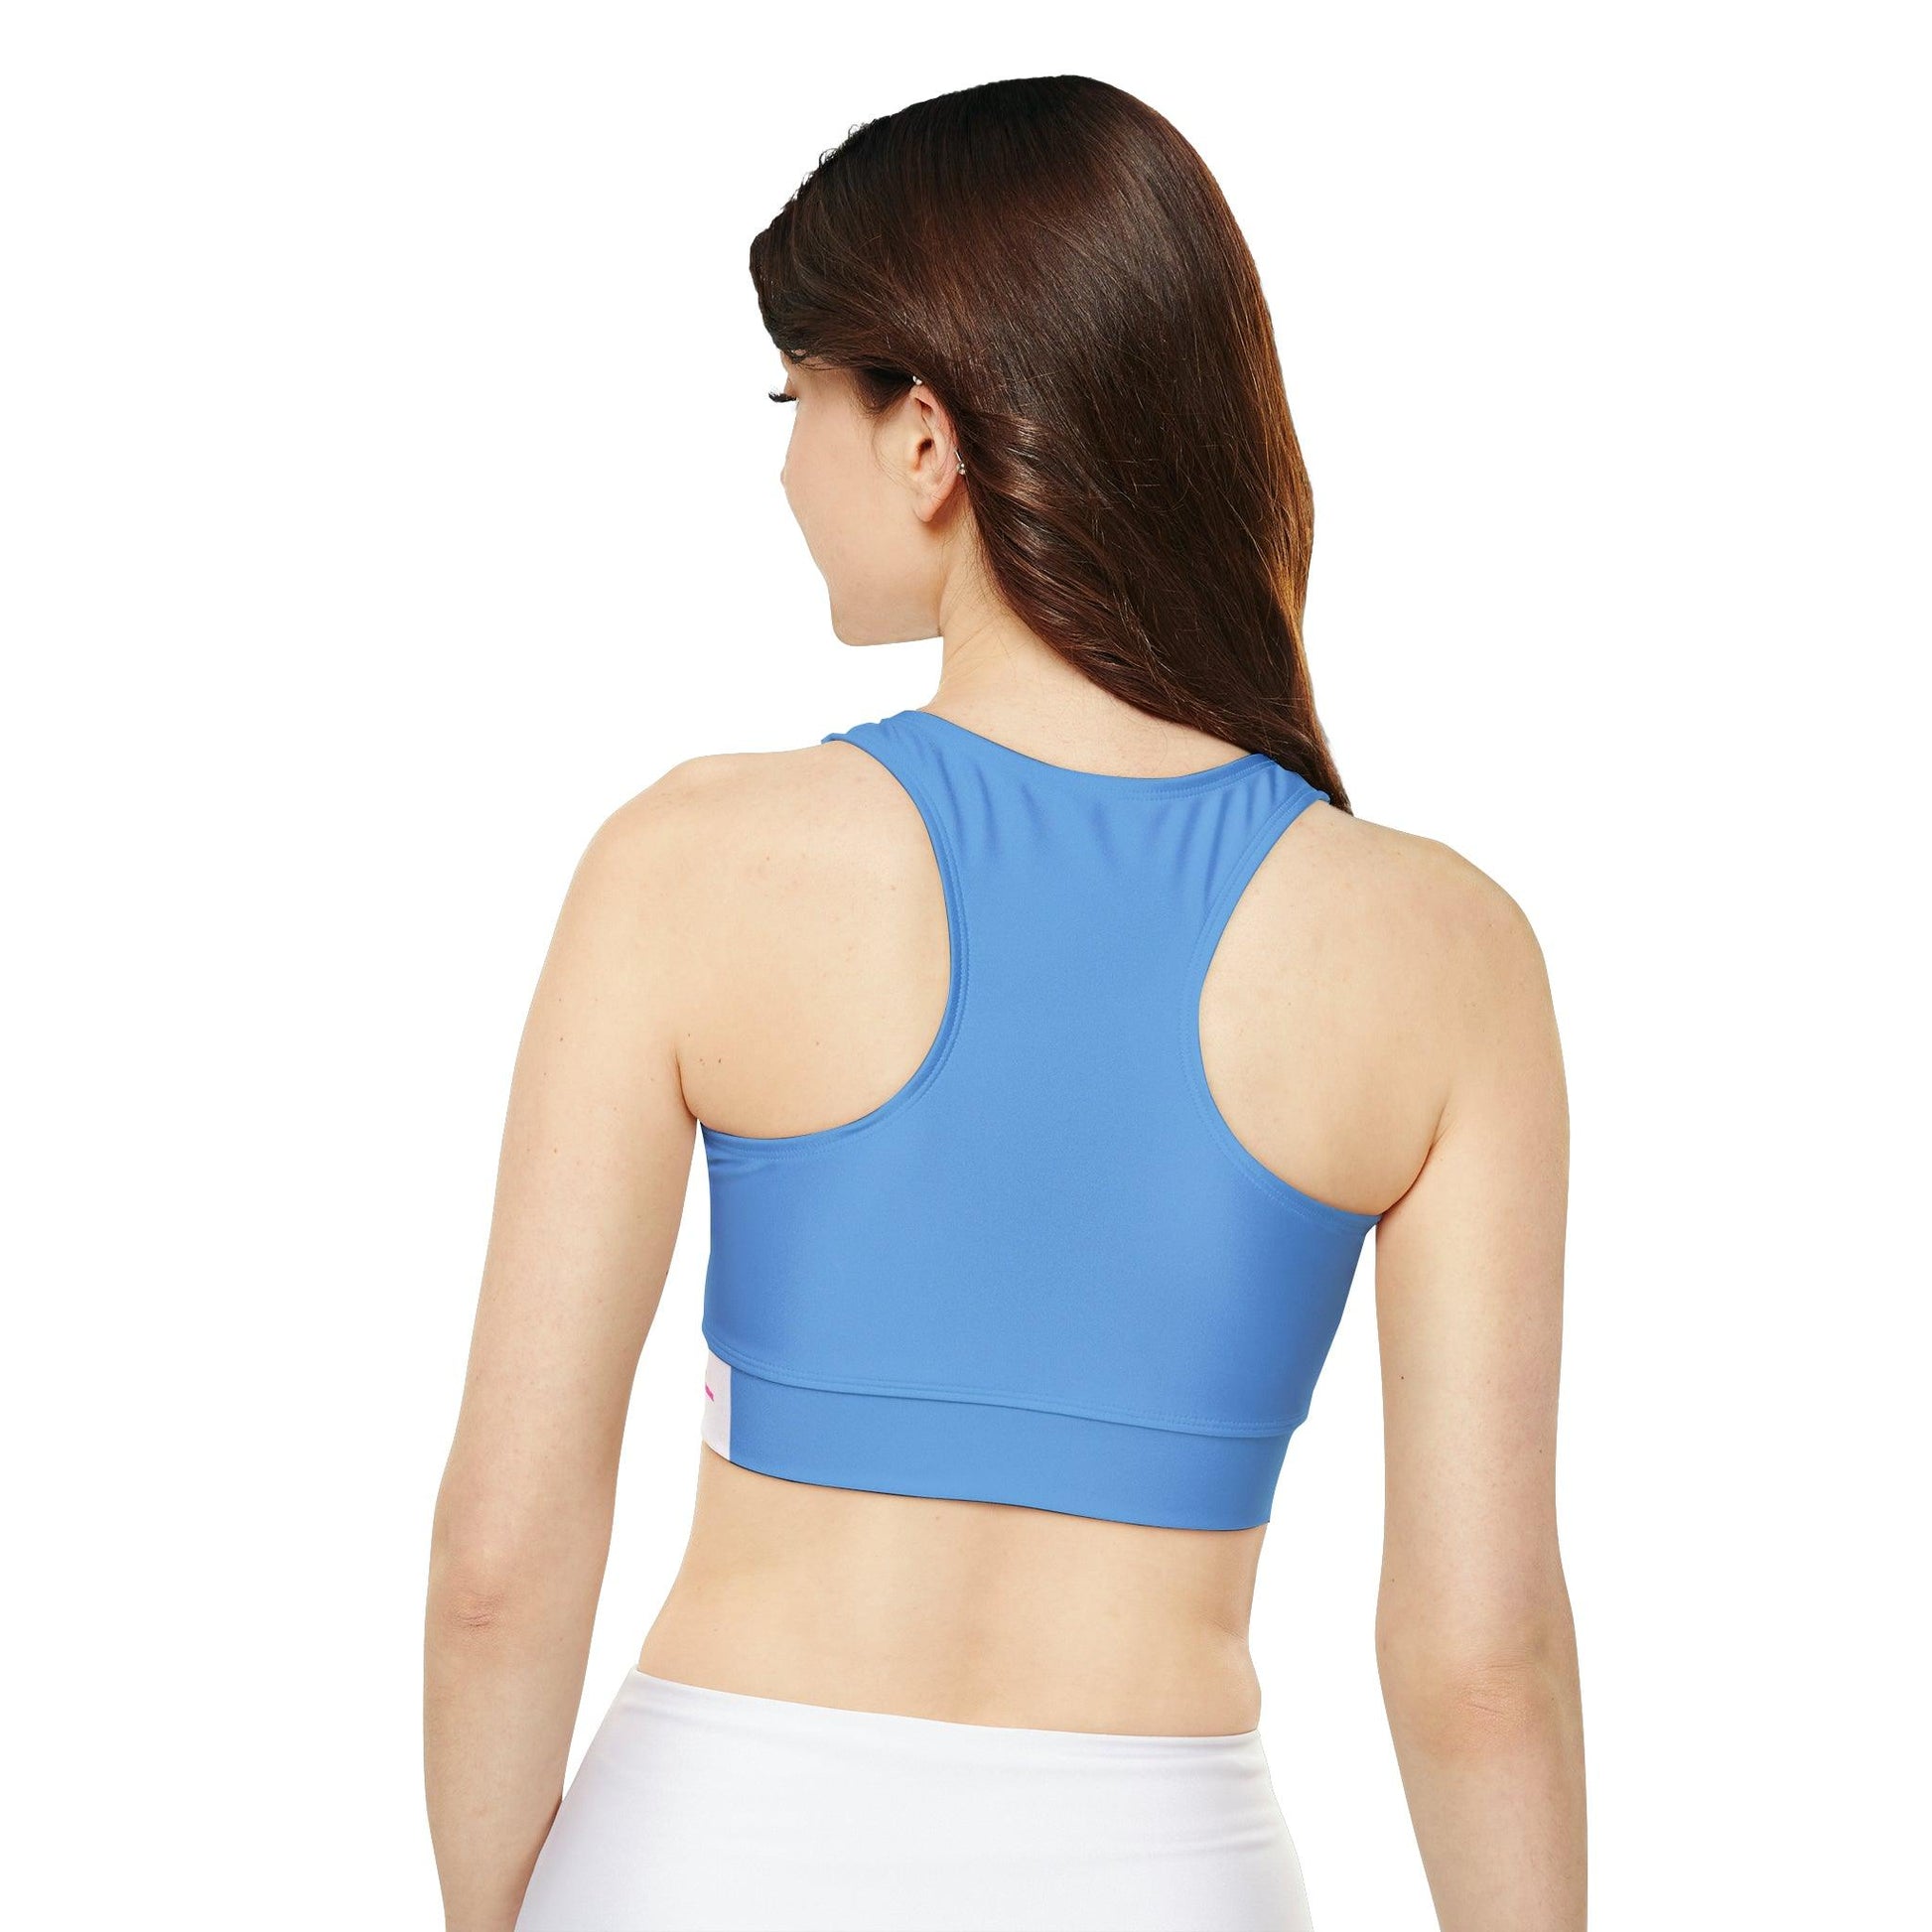 Light Blue Fully Lined, Padded Sports Bra - COFFEEBRE